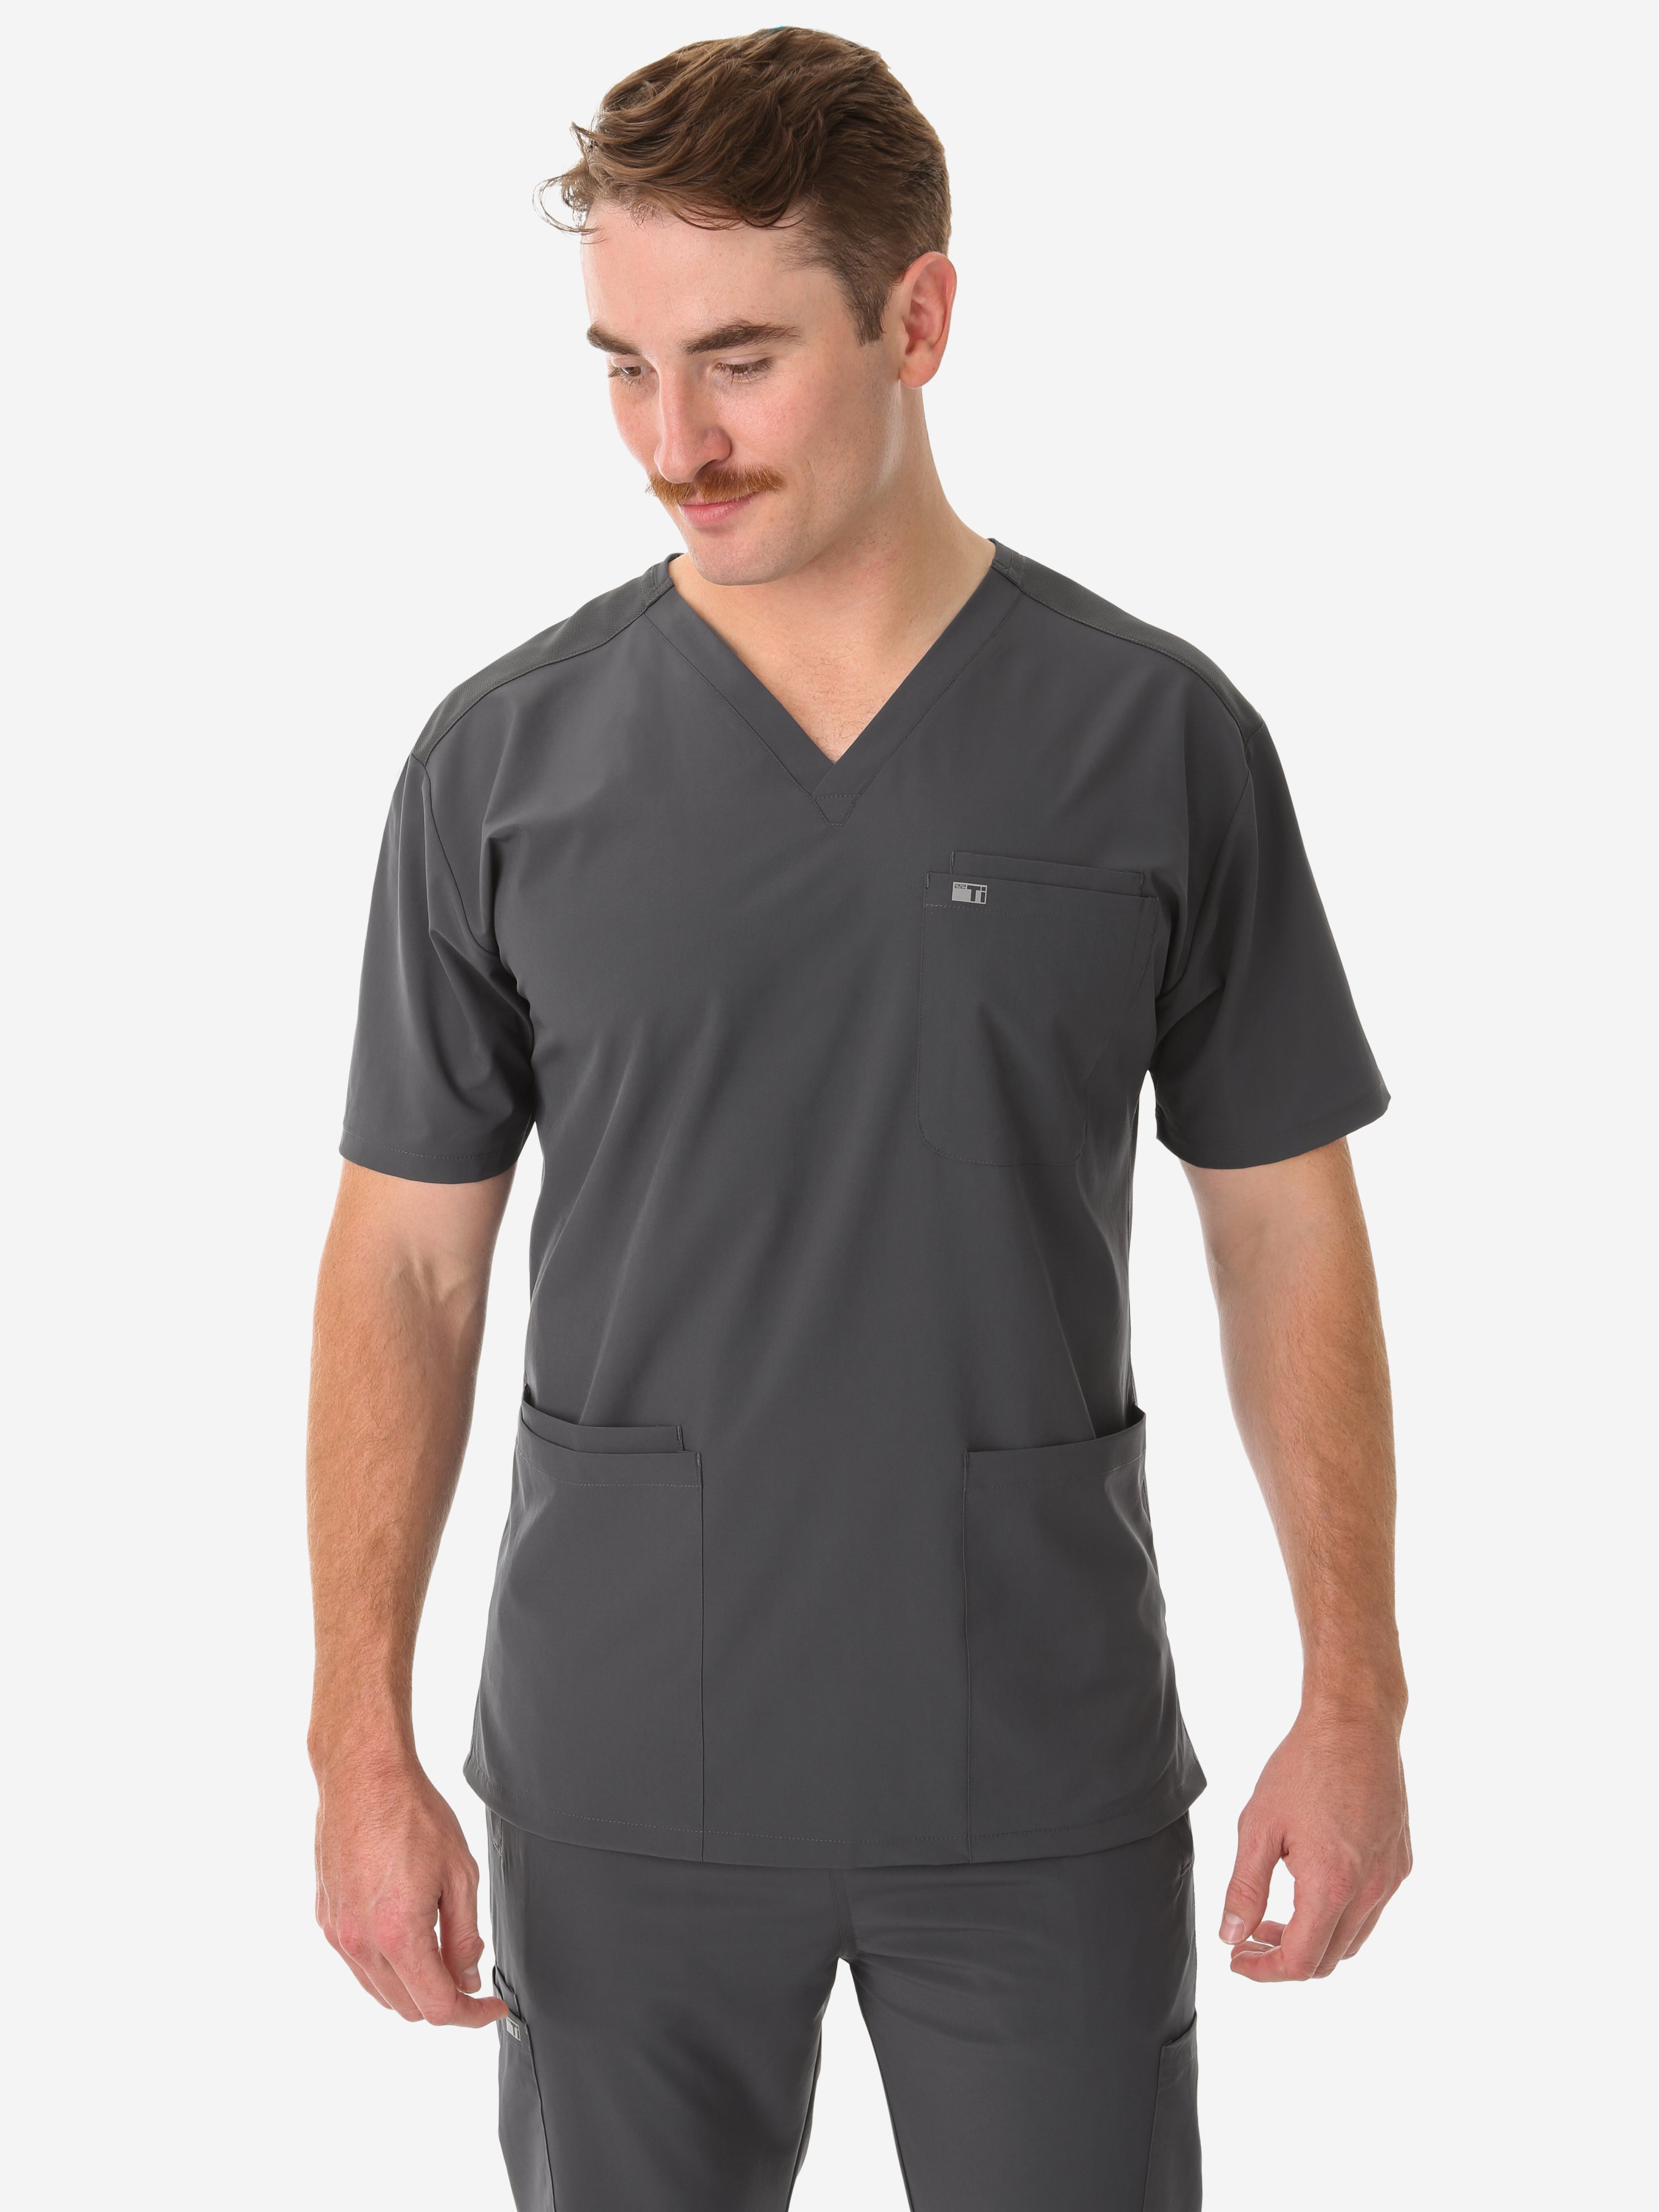 Men's Charocal Gray Five-Pocket Scrub Top Only Front View